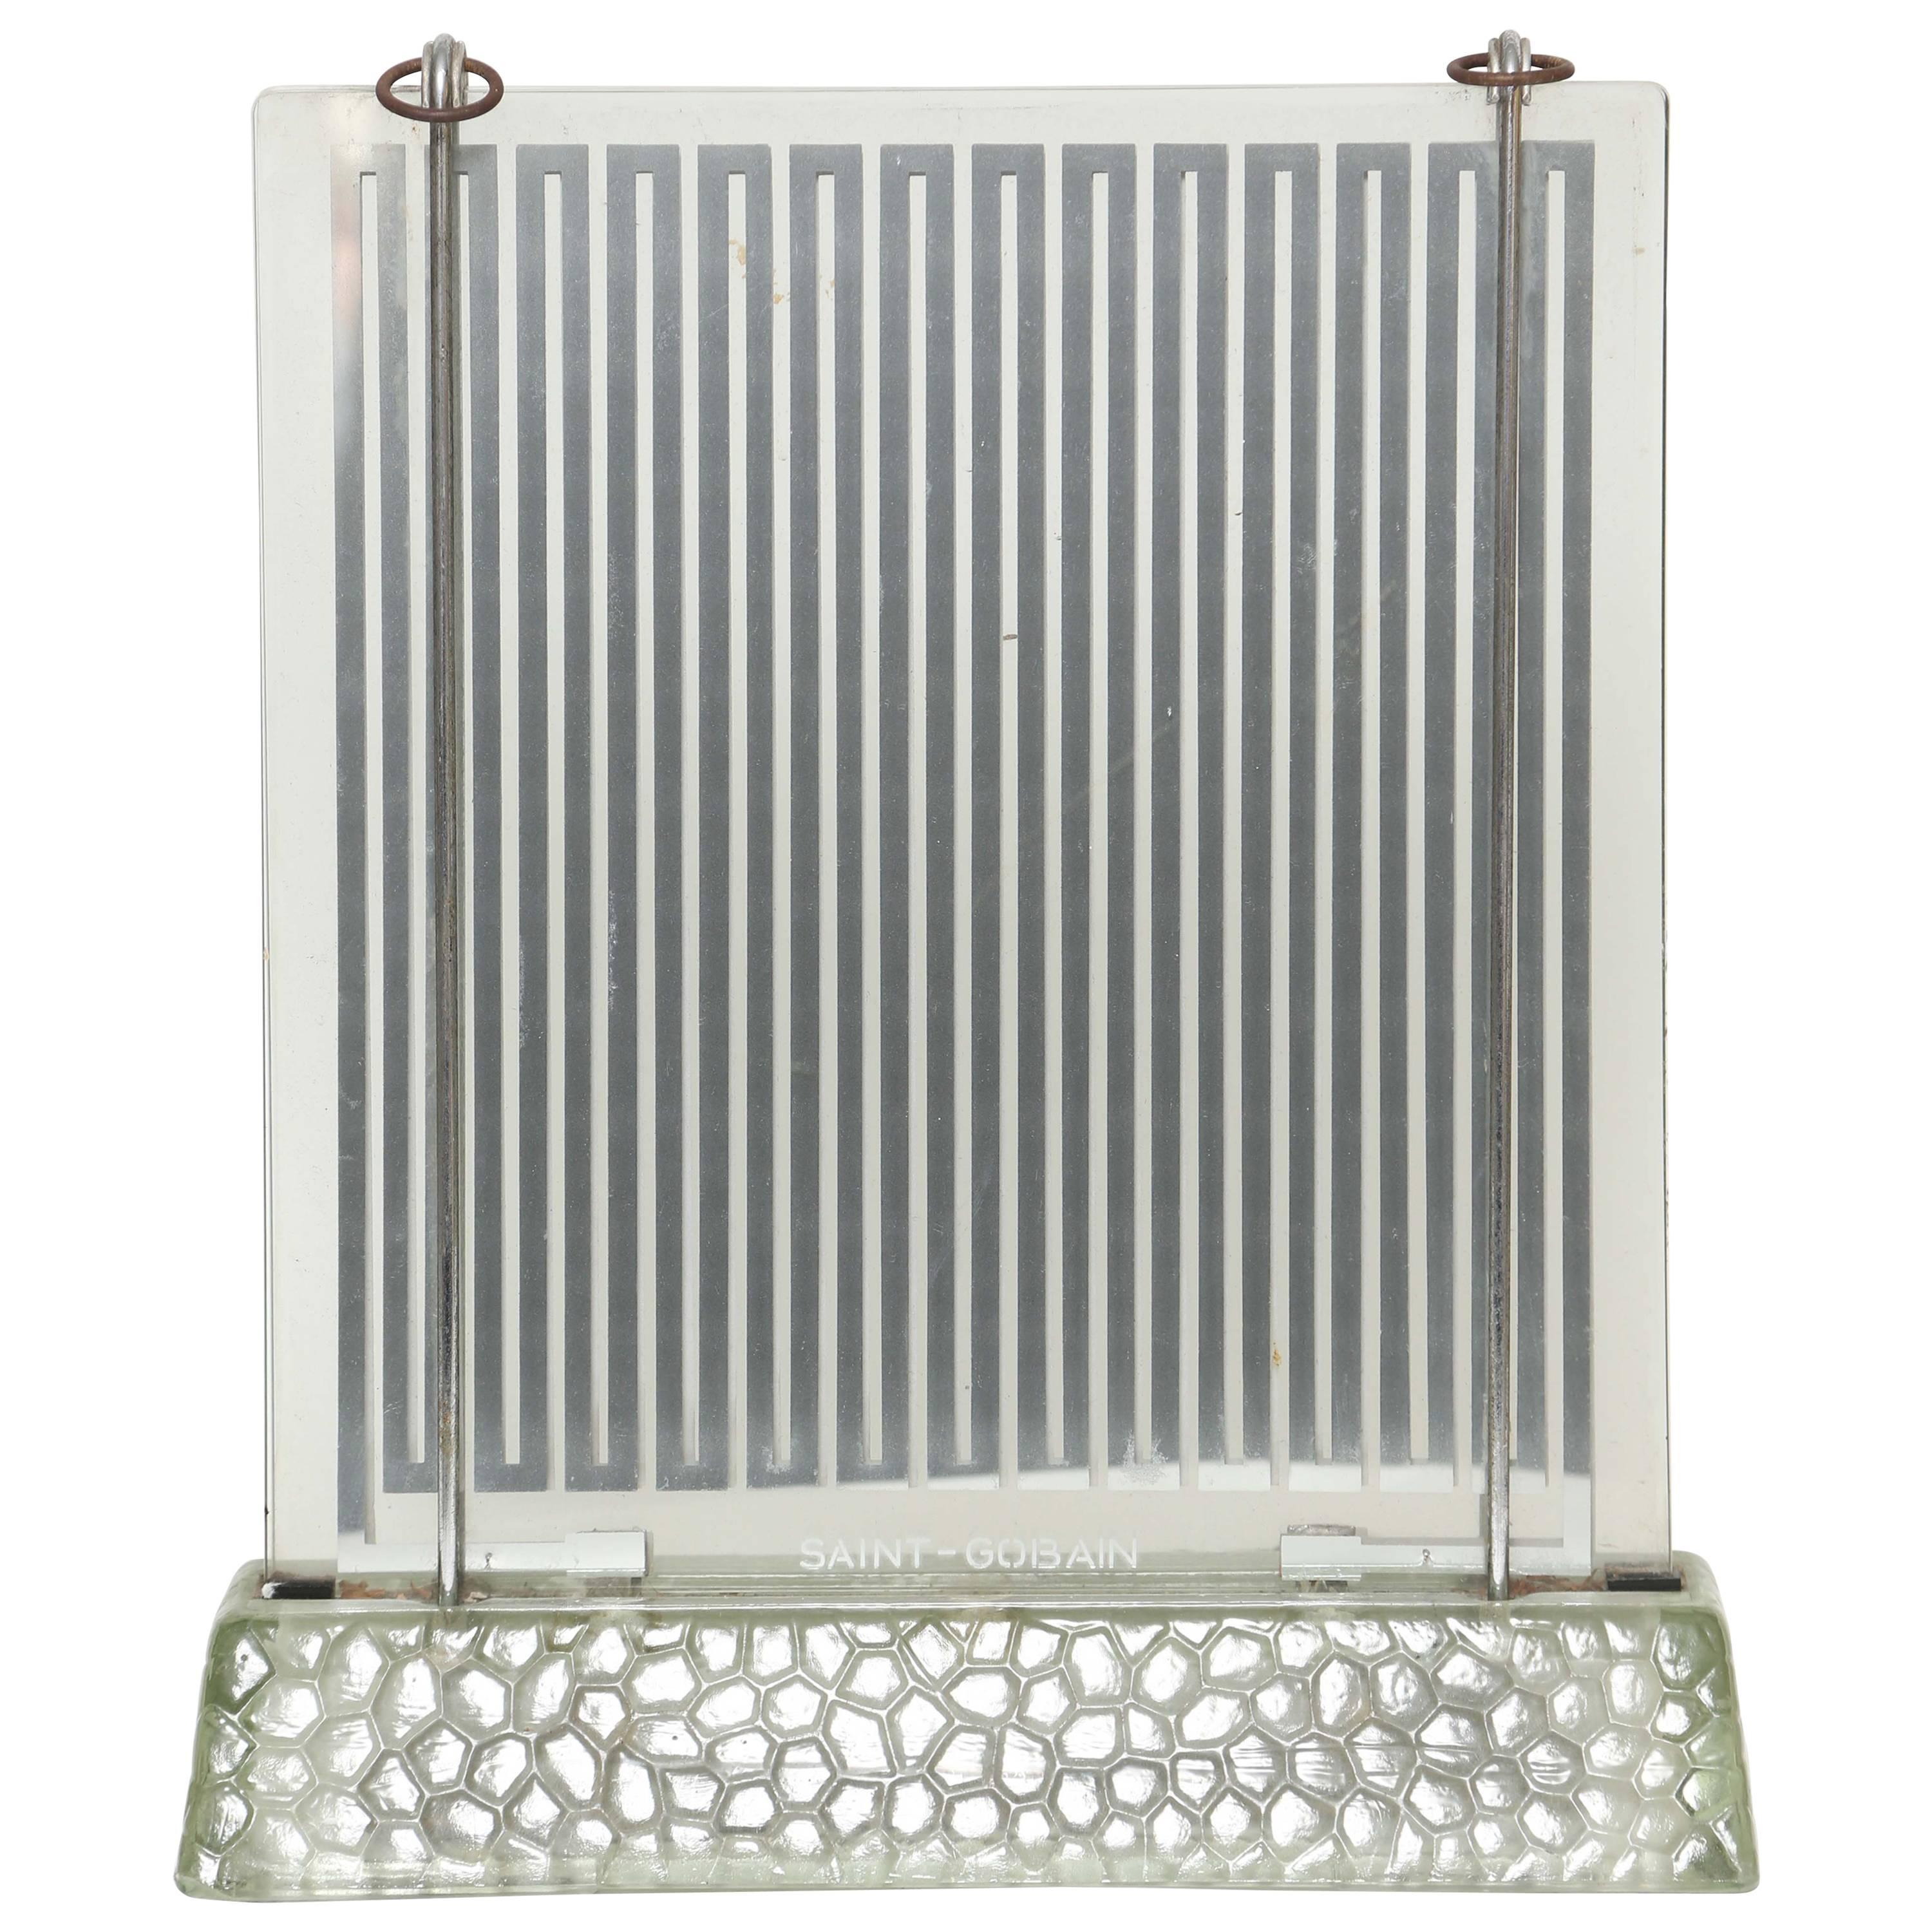 Rare Art Deco Glass Heater by Rene-Andre Coulon for Saint-Gobain, 1937